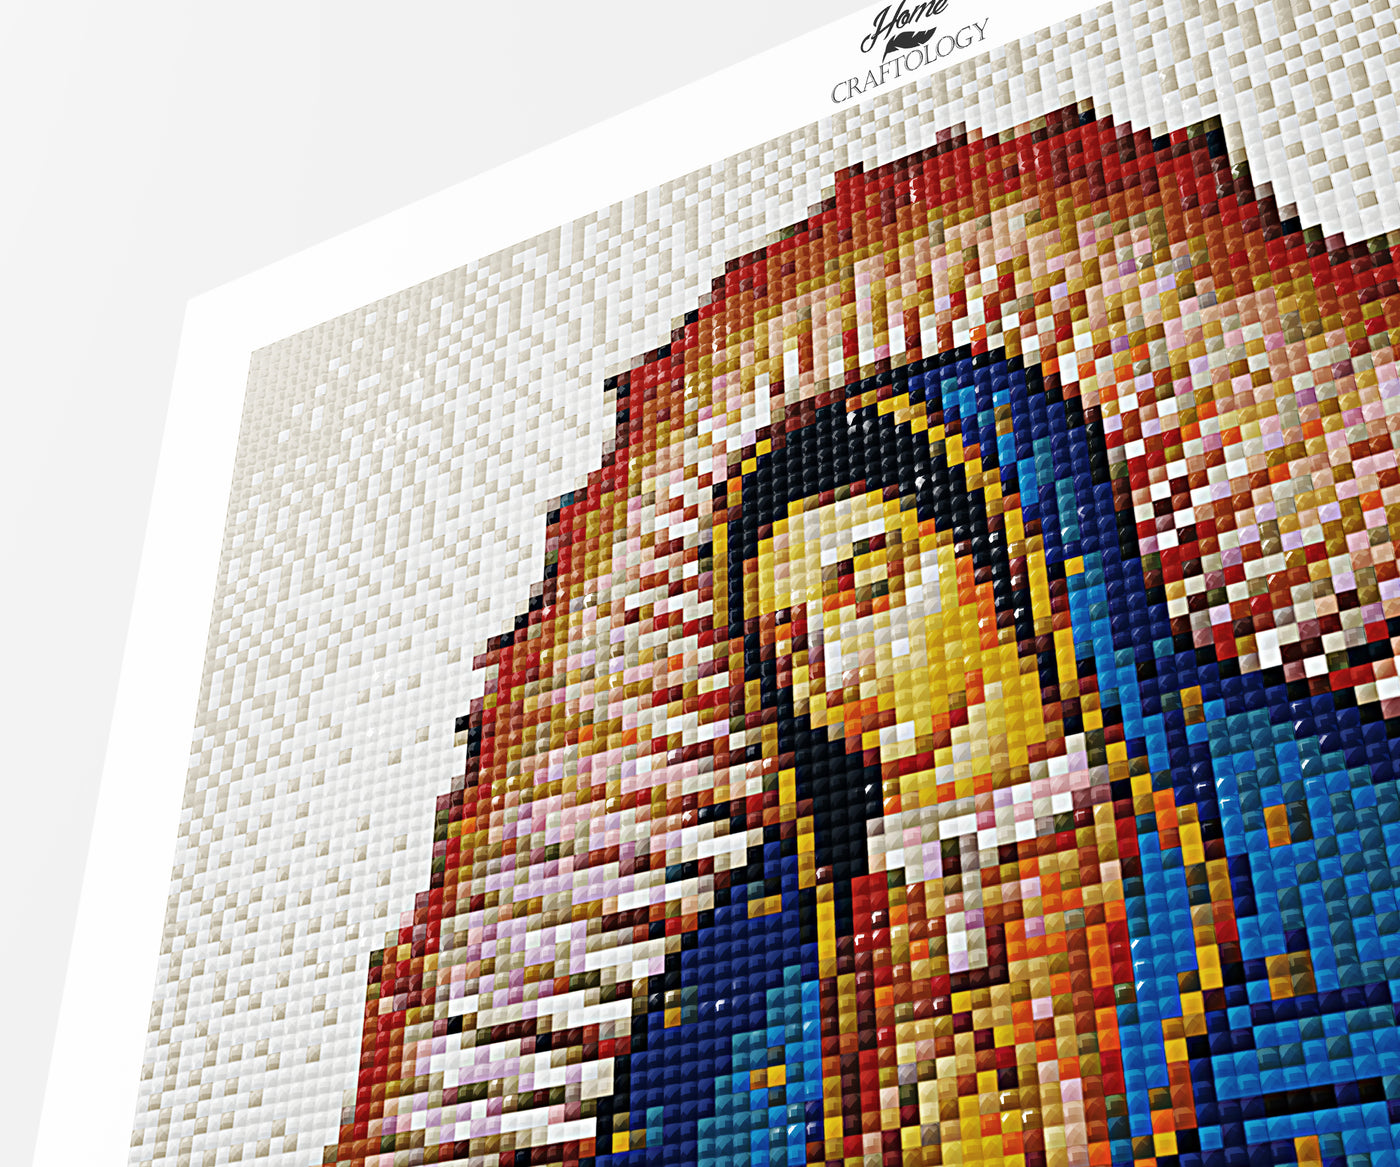 Our Lady of Guadalupe - Premium Diamond Painting Kit